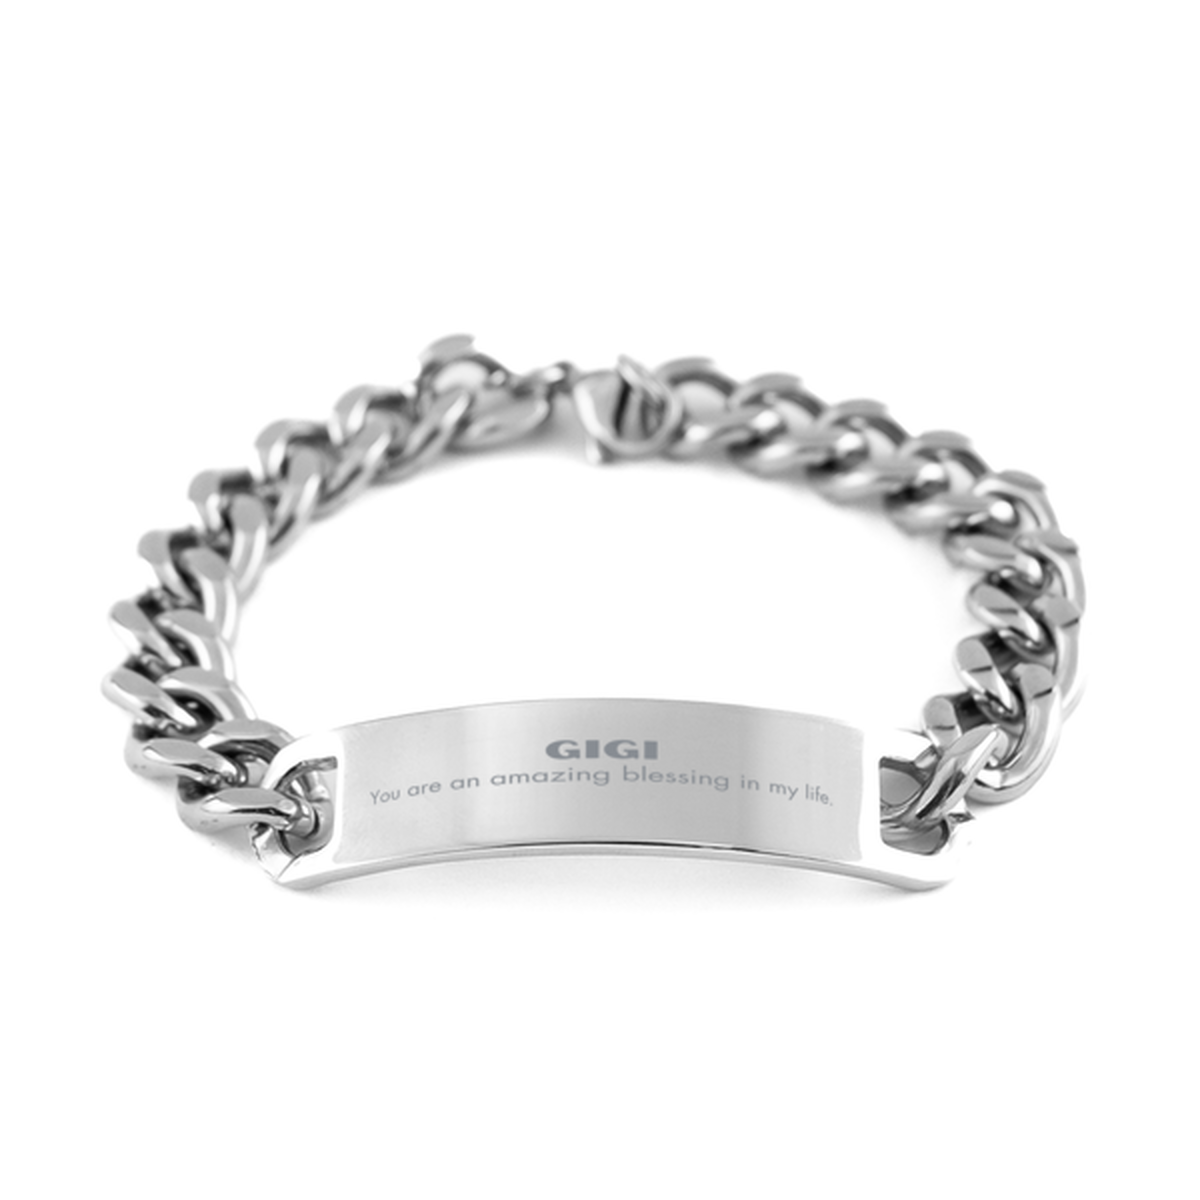 Gigi Cuban Chain Stainless Steel Bracelet, You are an amazing blessing in my life, Thank You Gifts For Gigi, Inspirational Birthday Christmas Unique Gifts For Gigi